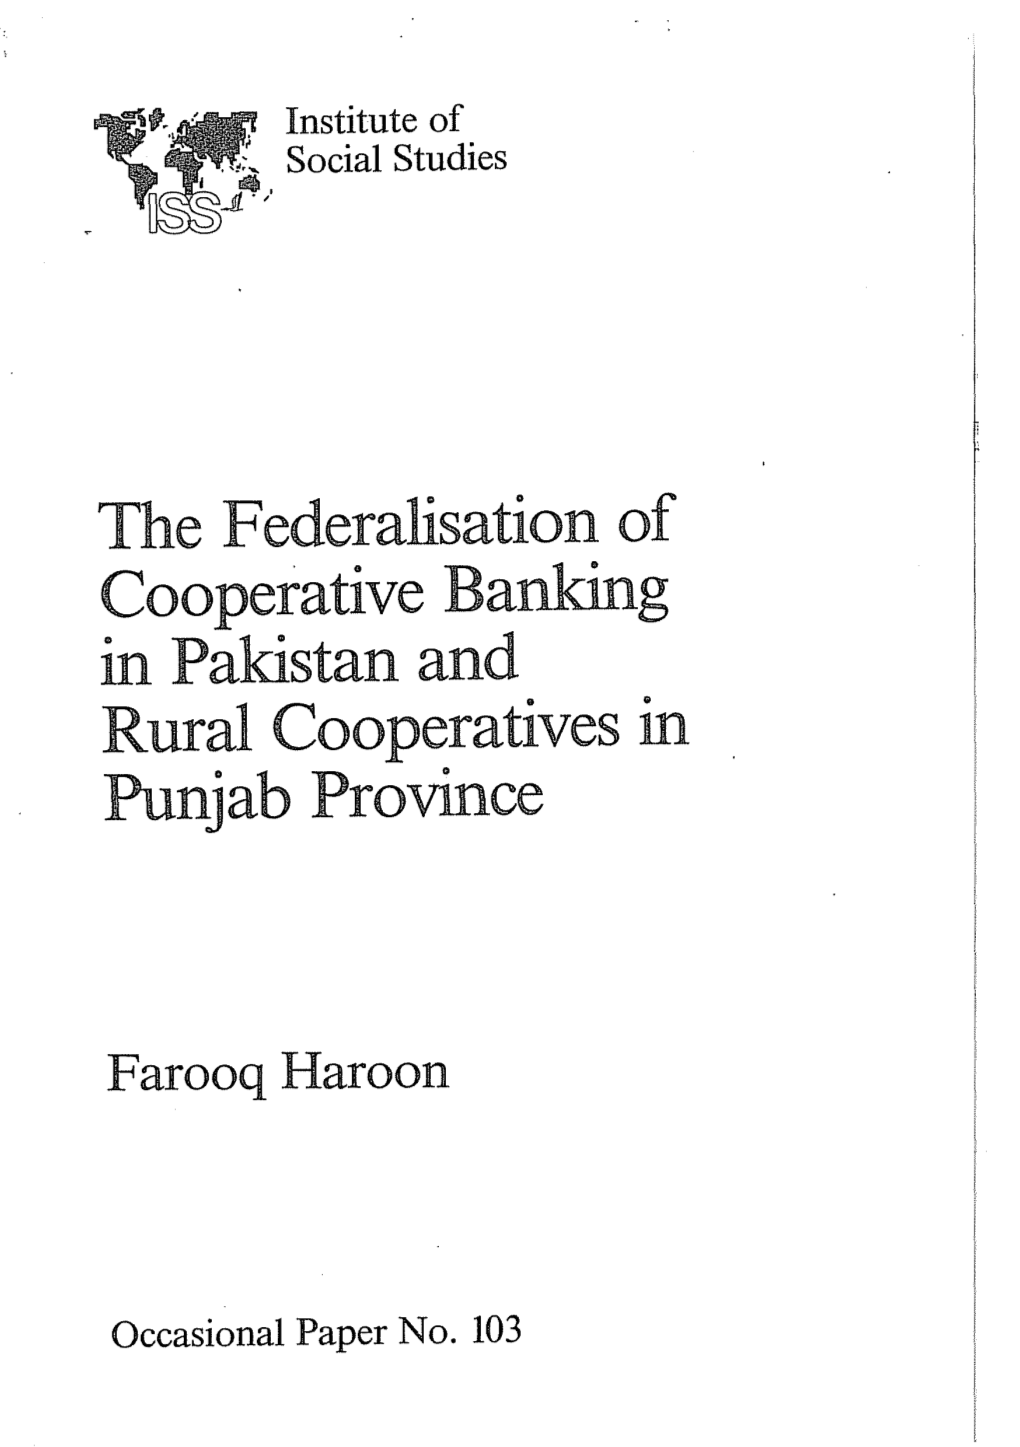 The F Ederalisation of Cooperative Banking in Pakistan and Rural Cooperatives in Punjab Province